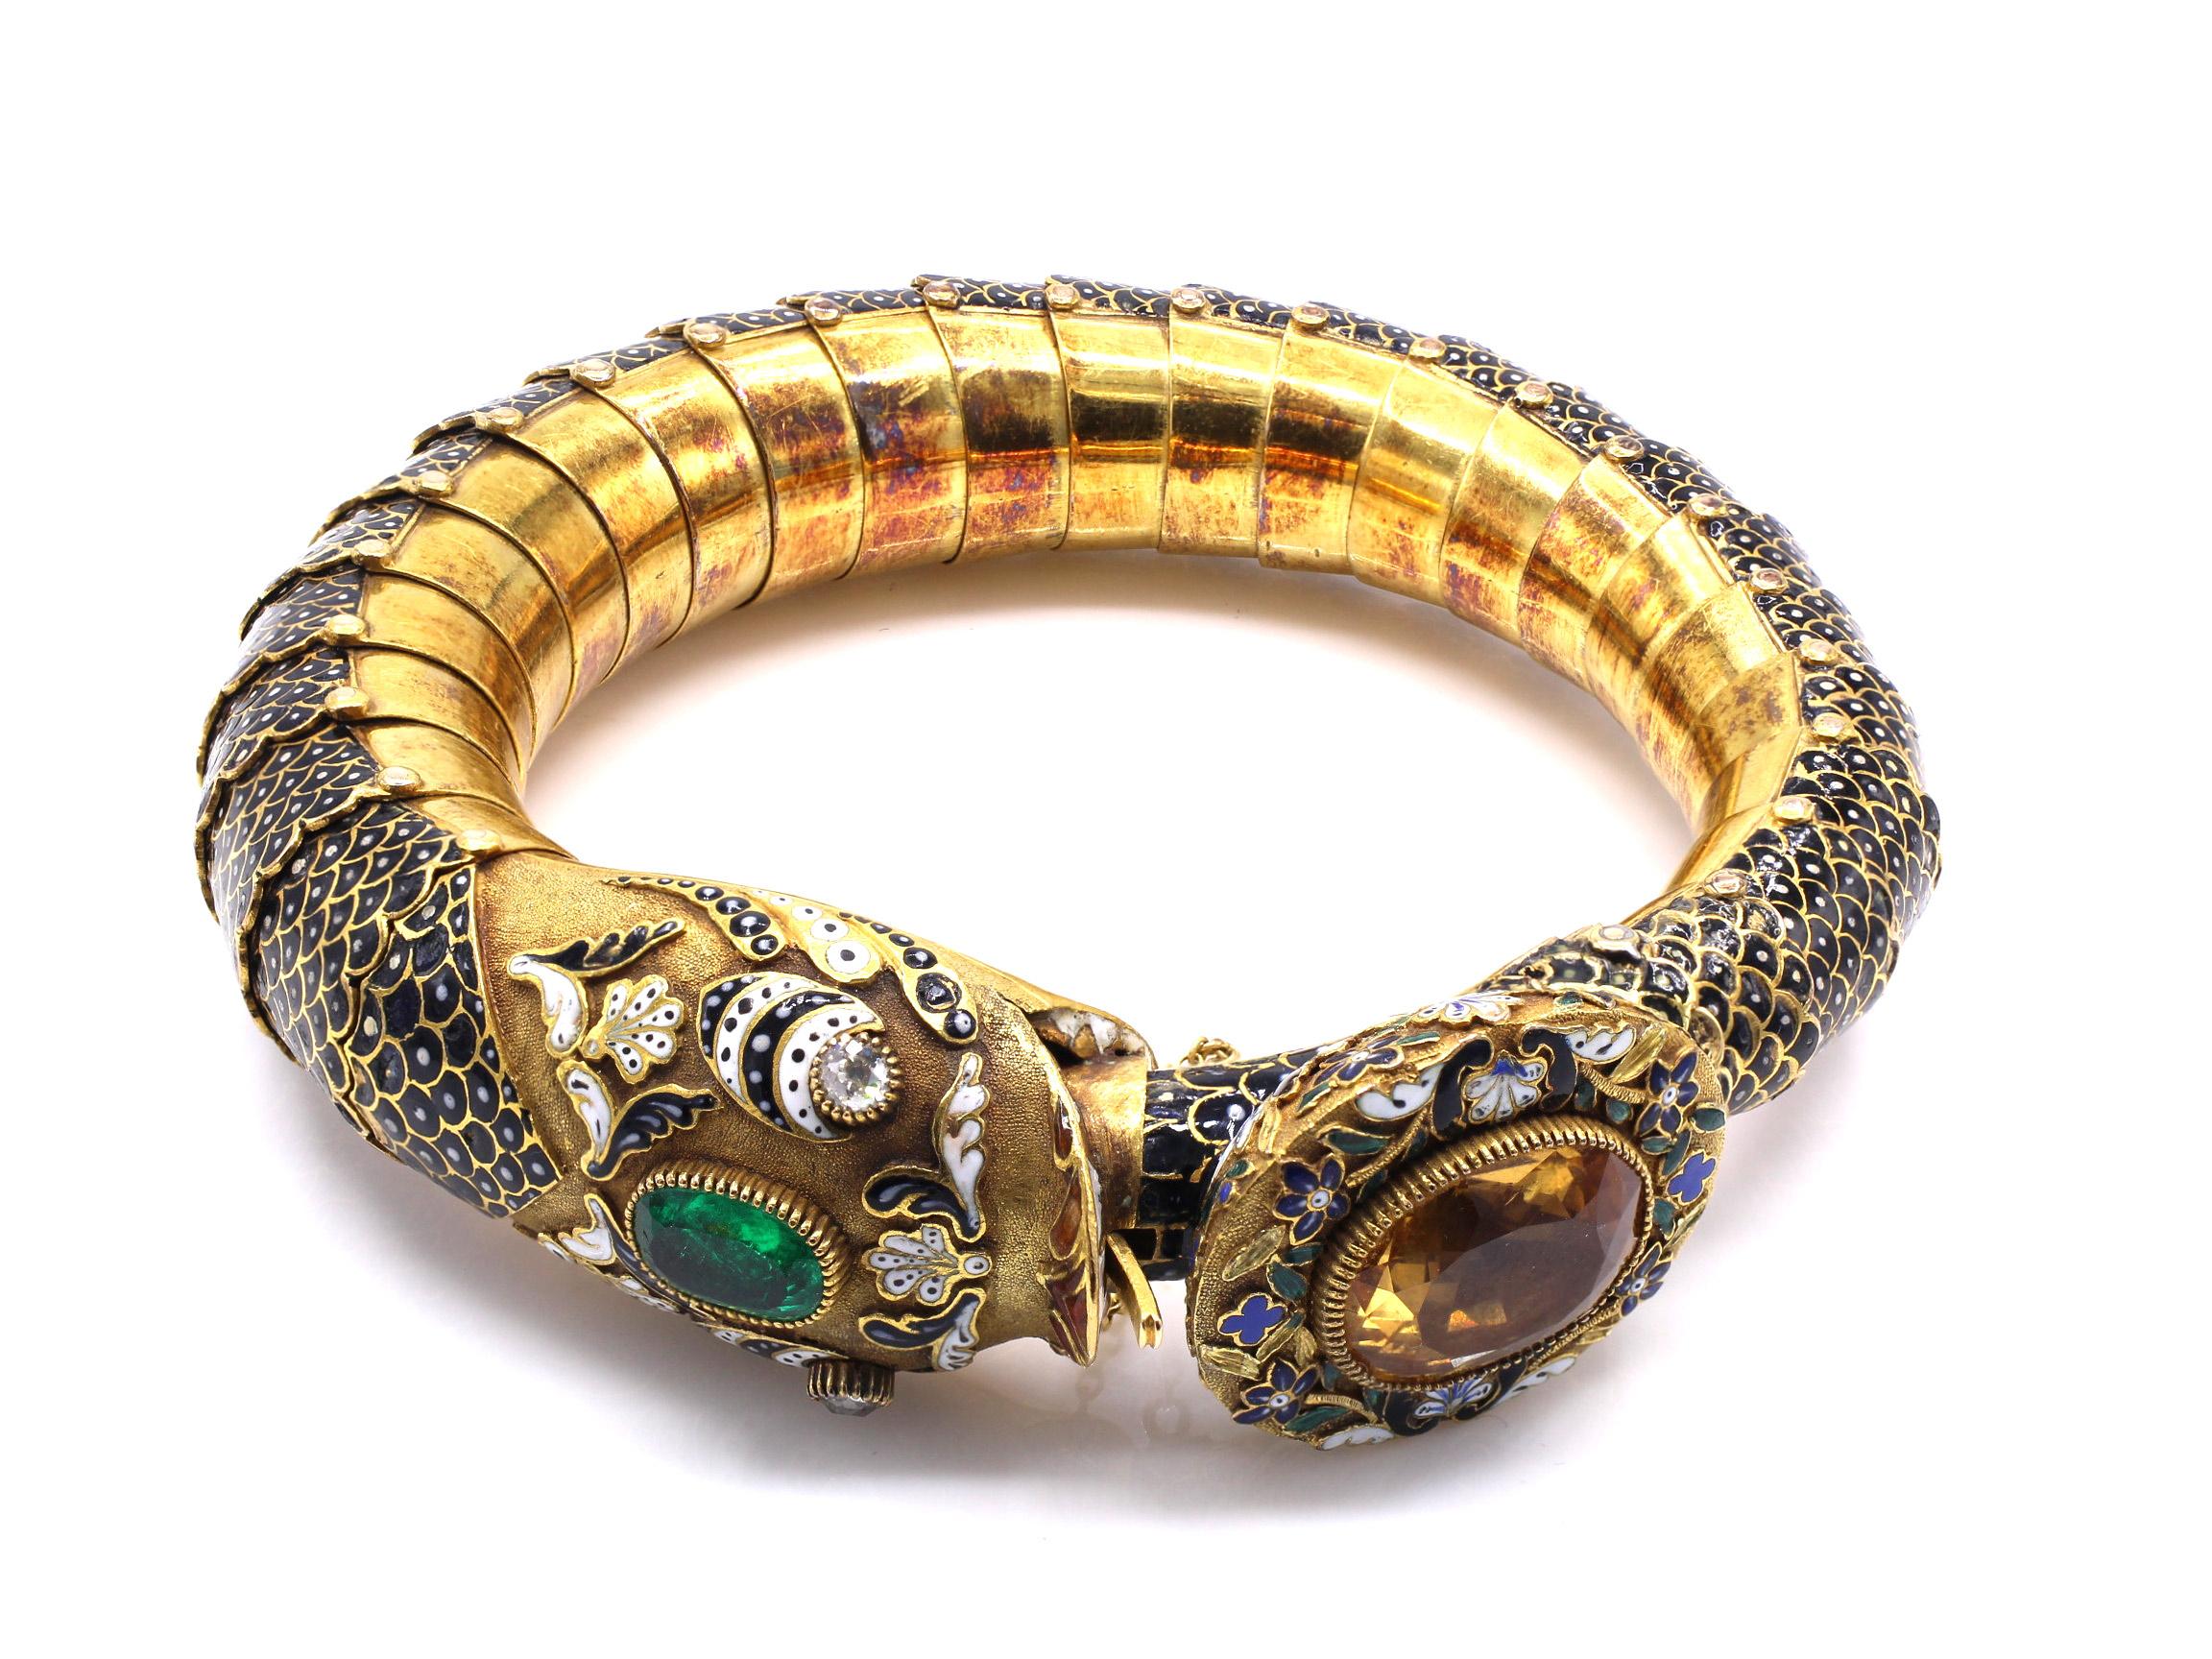 Unique antique Austro-Hungarian bracelet from ca 1870. Amazingly designed and formidably handcrafted in 18 Karat yellow gold with intricate enamel work this serpent bracelet reflects the best of jewelry work form its' period. Each element is